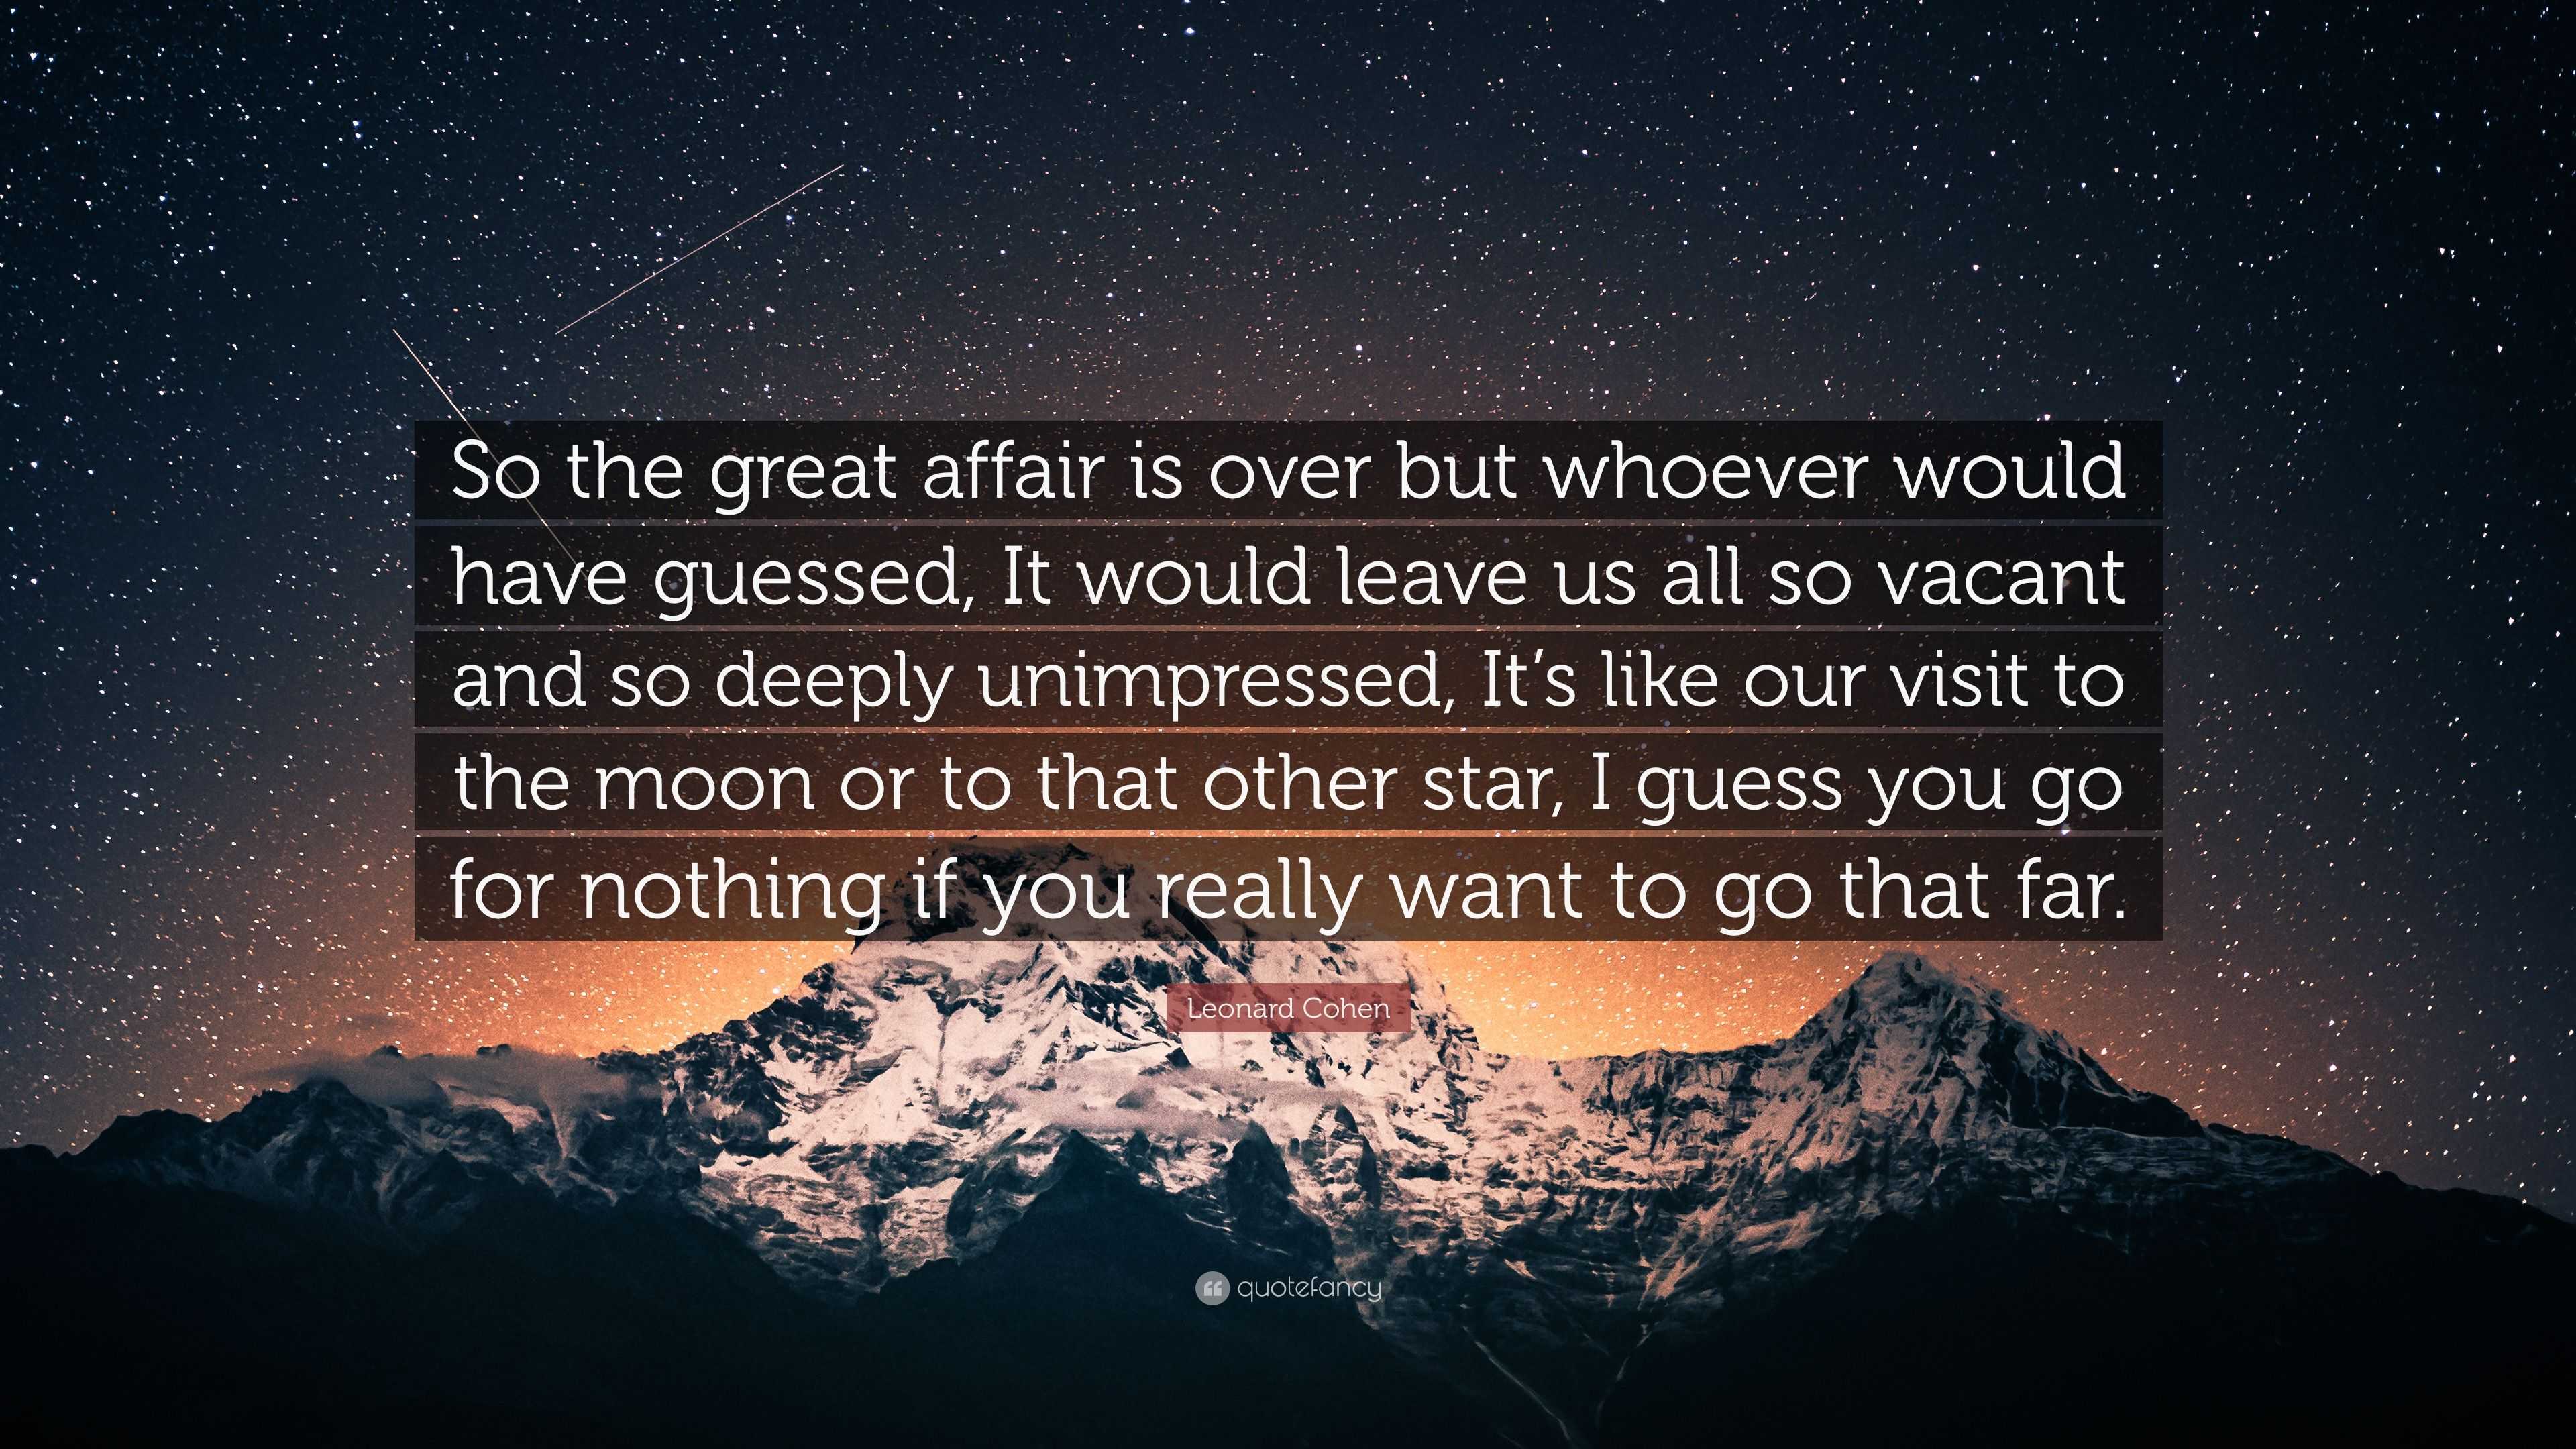 Leonard Cohen Quote: the great is over but whoever have guessed, It would leave us all so vacant and so deeply unimpressed, I...”